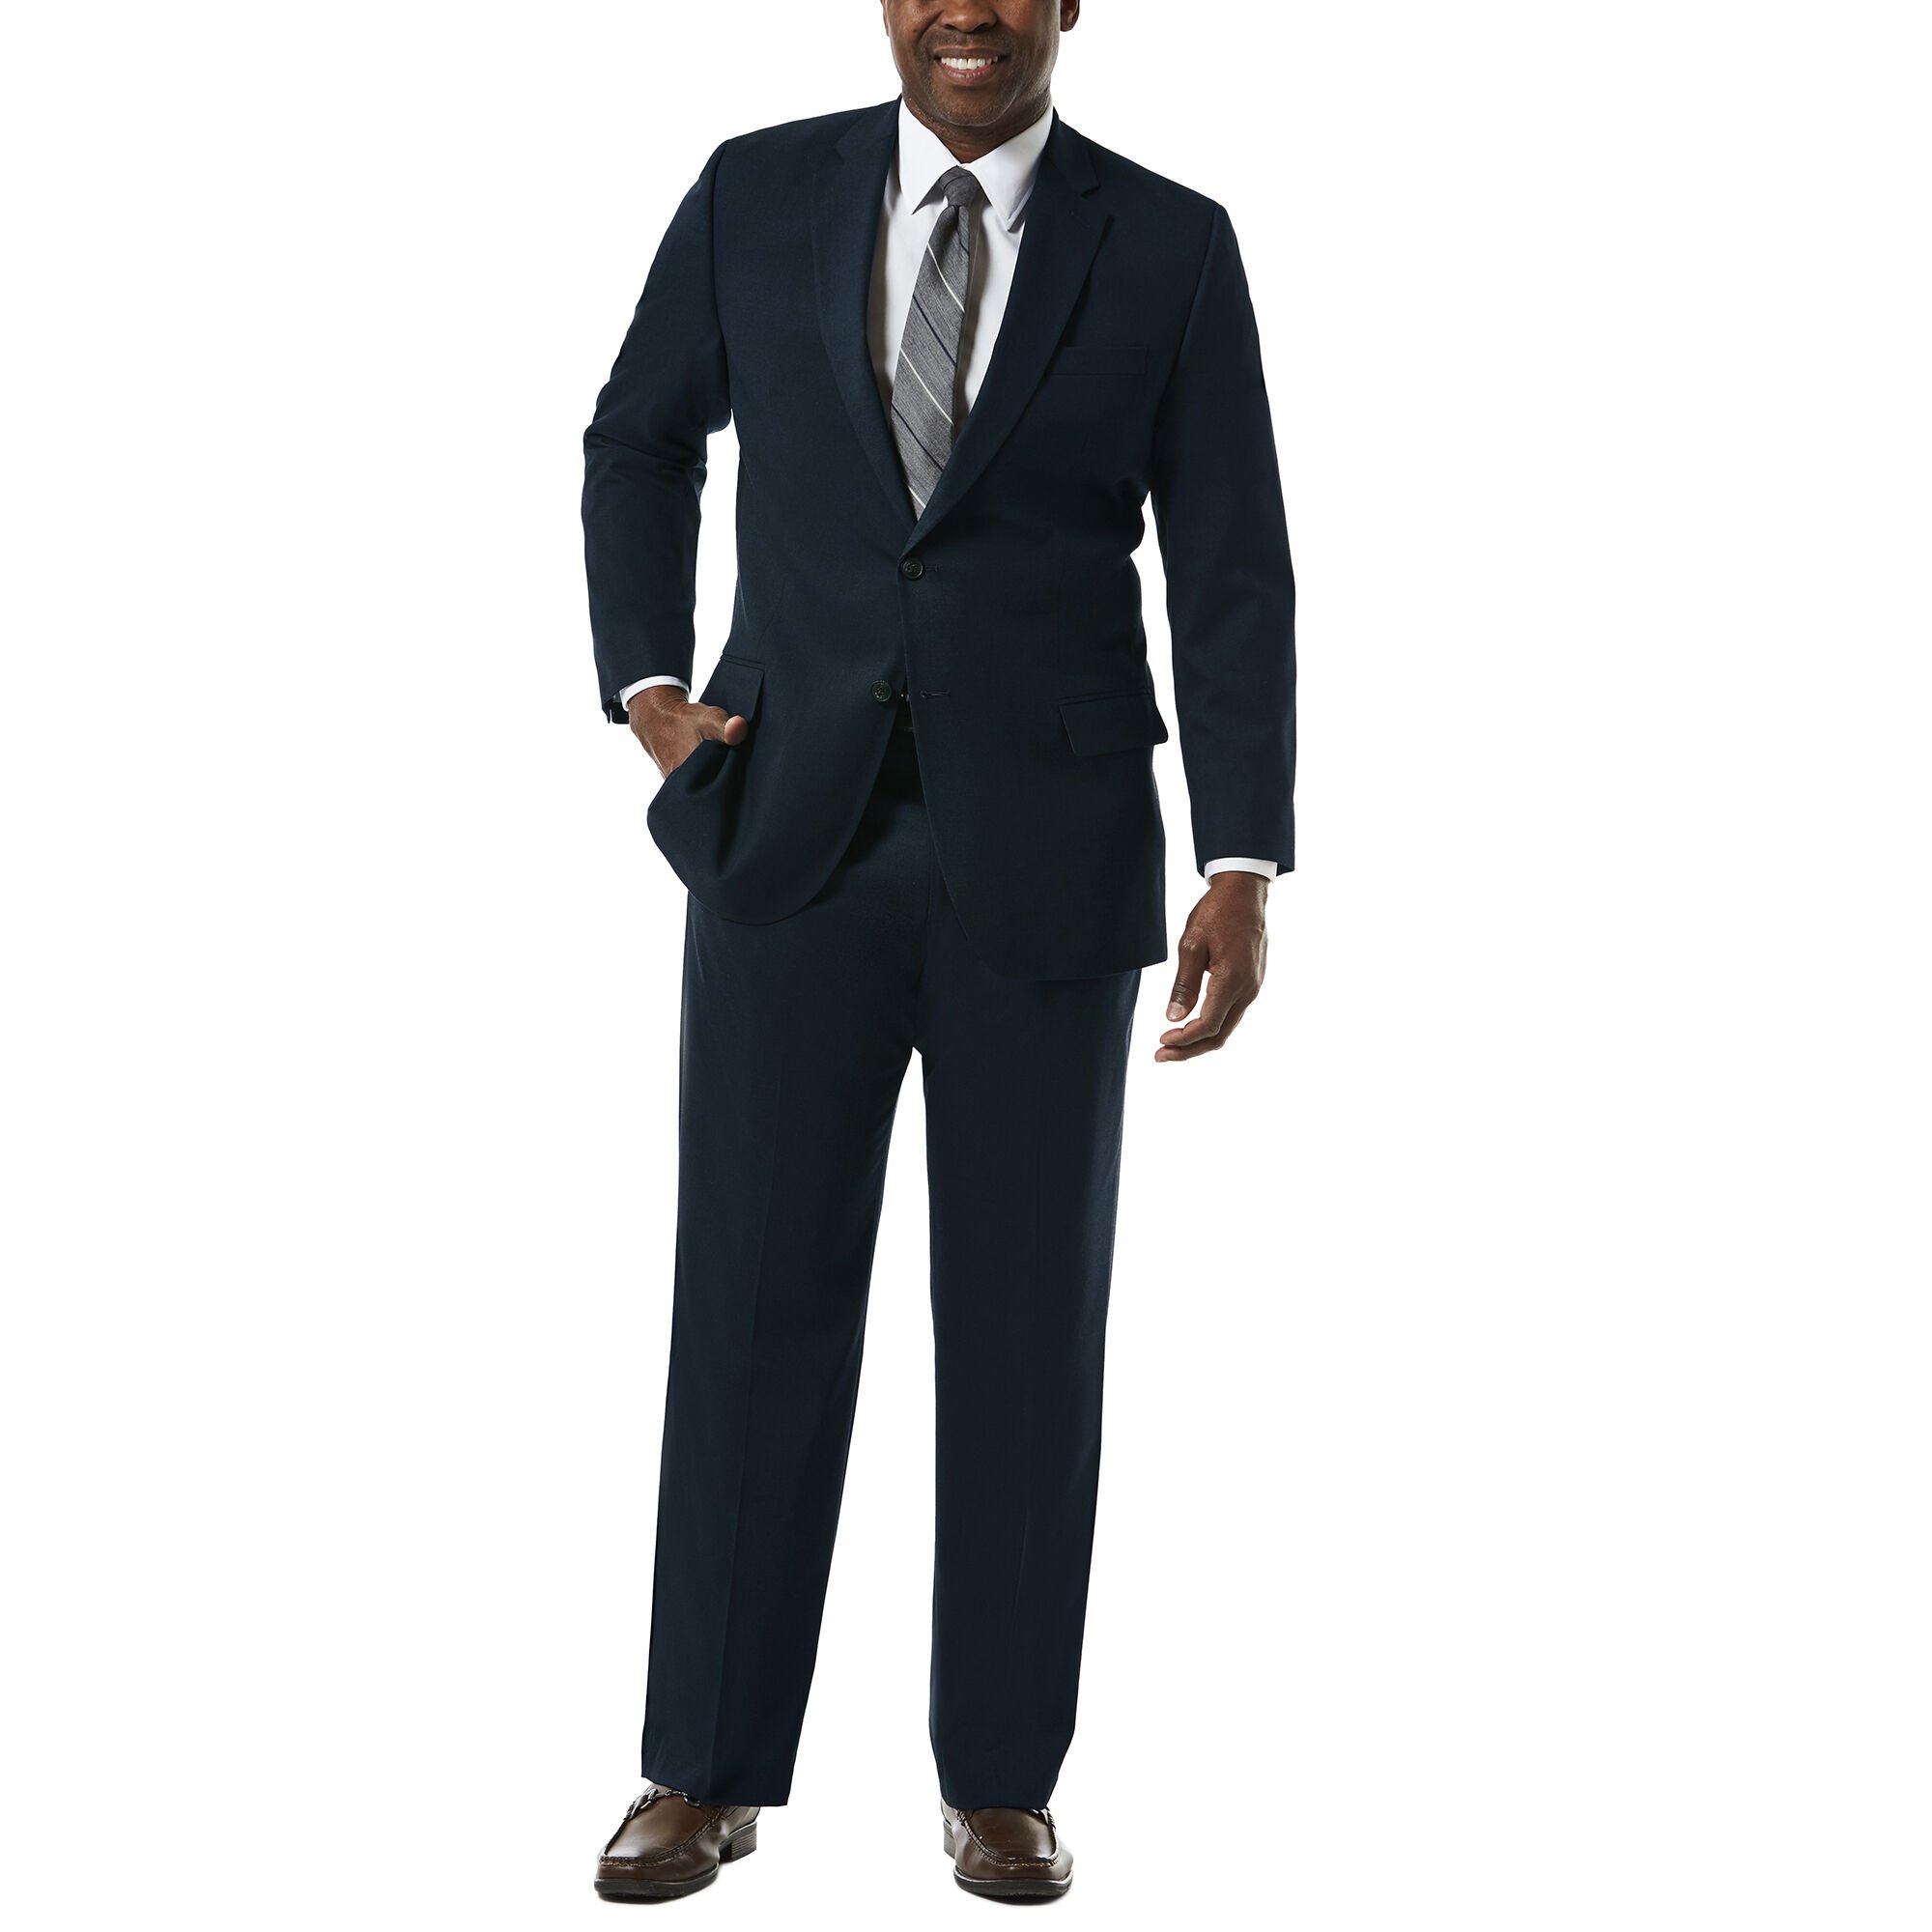 Big & Tall J.M. Haggar Premium Stretch Suit Jacket Dark Navy Classic Fit Notched Lapel 2 Button Closure Center Vent 64% Polyester, 34% Viscoe Rayon 2% Spandex Dry Clean Only Imported Style #: HZ90182 Size - L